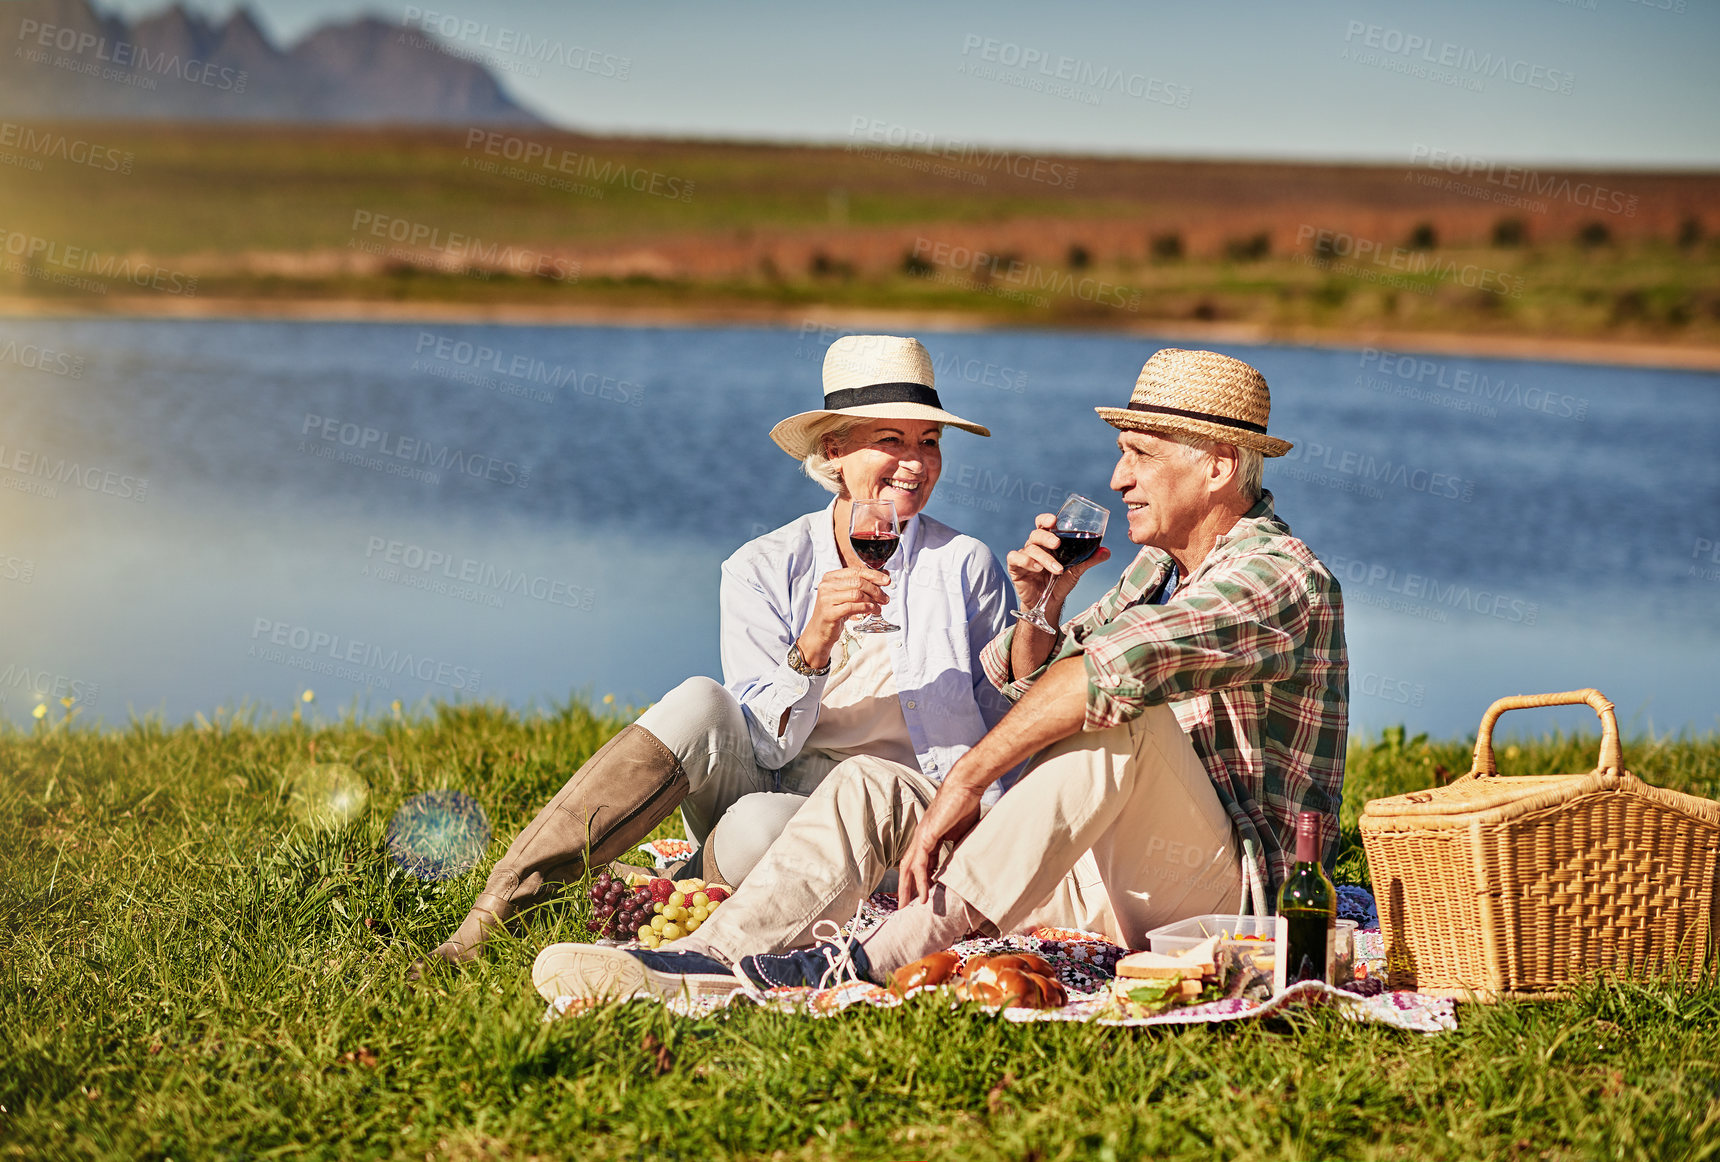 Buy stock photo Senior couple, wine glasses and picnic in outdoor for love, romance and relax by lake in nature. Elderly people, grass and drink alcohol on vacation, holiday and calm retirement for bonding by river